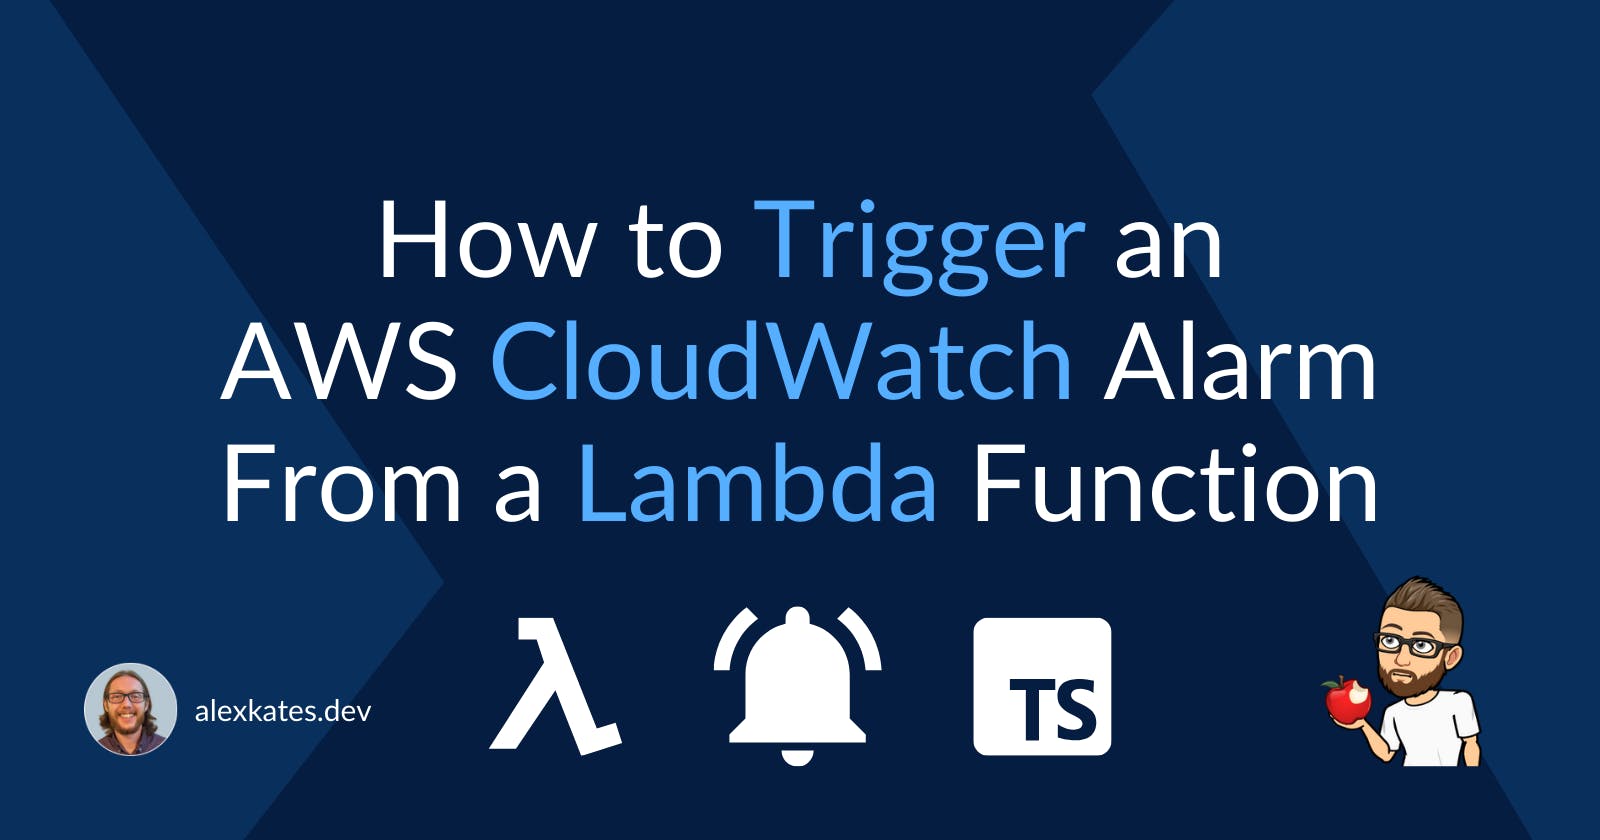 How to Trigger an AWS CloudWatch Alarm from a Lambda Function